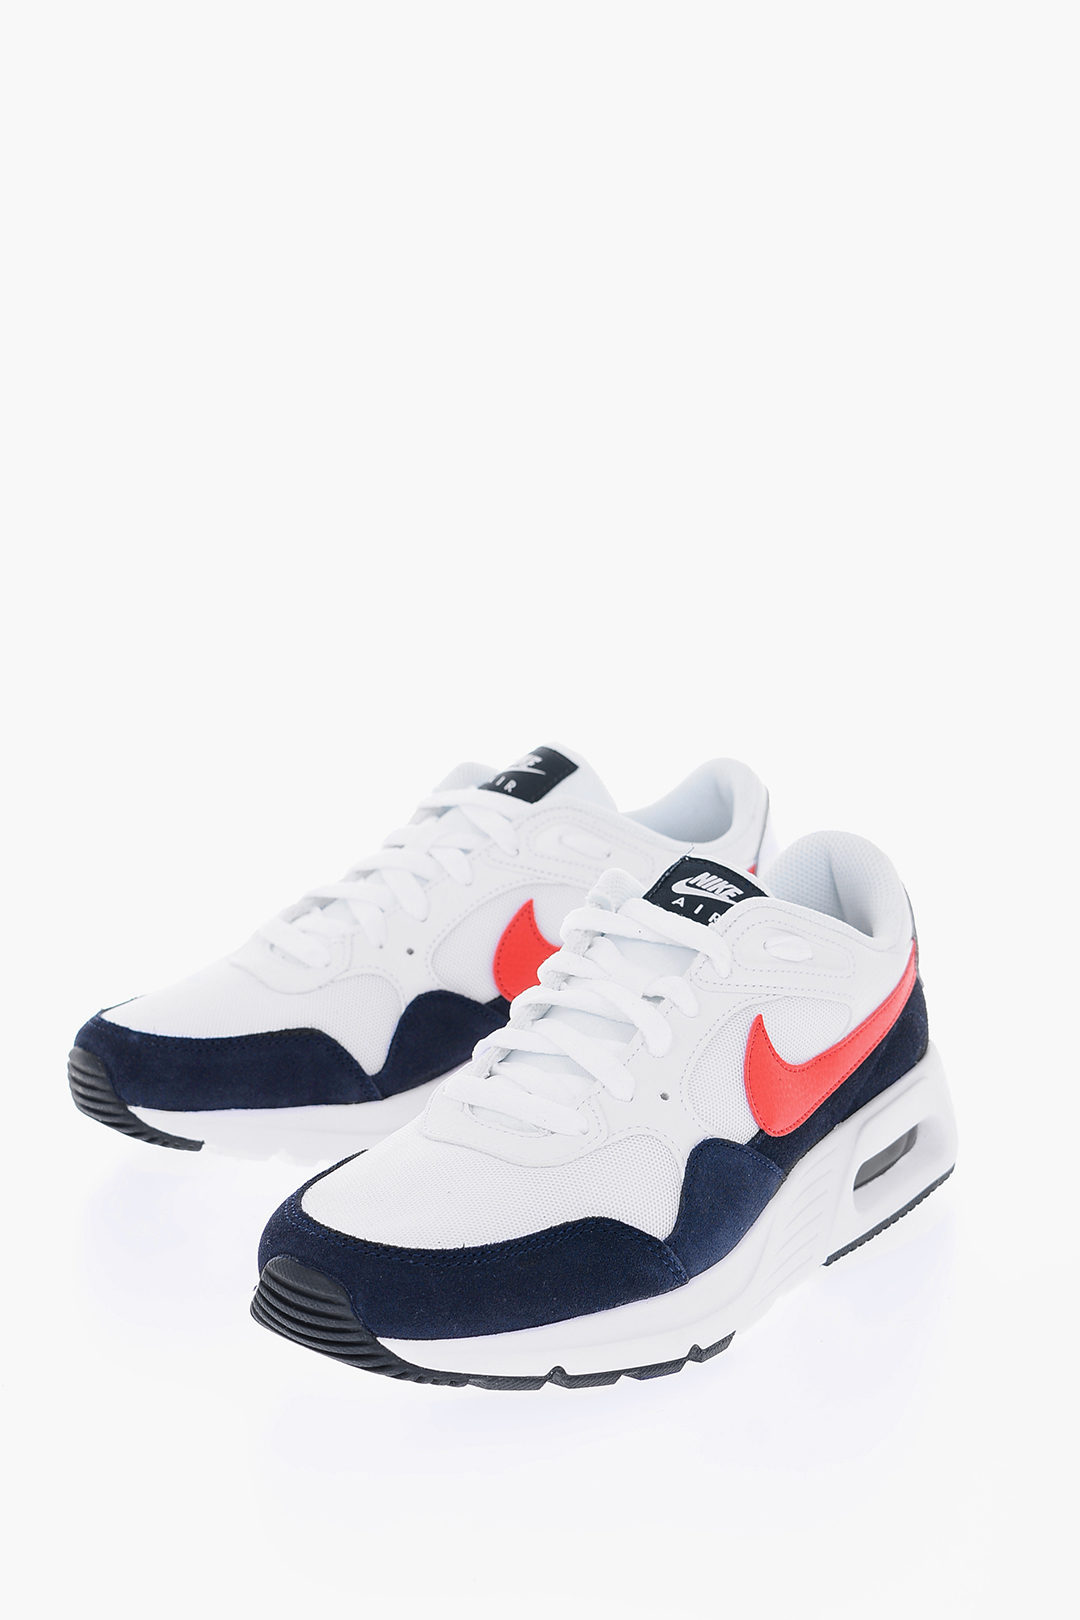 Voorbijgaand punch importeren Nike leather and fabric AIR MAX SC sneakers men - Glamood Outlet